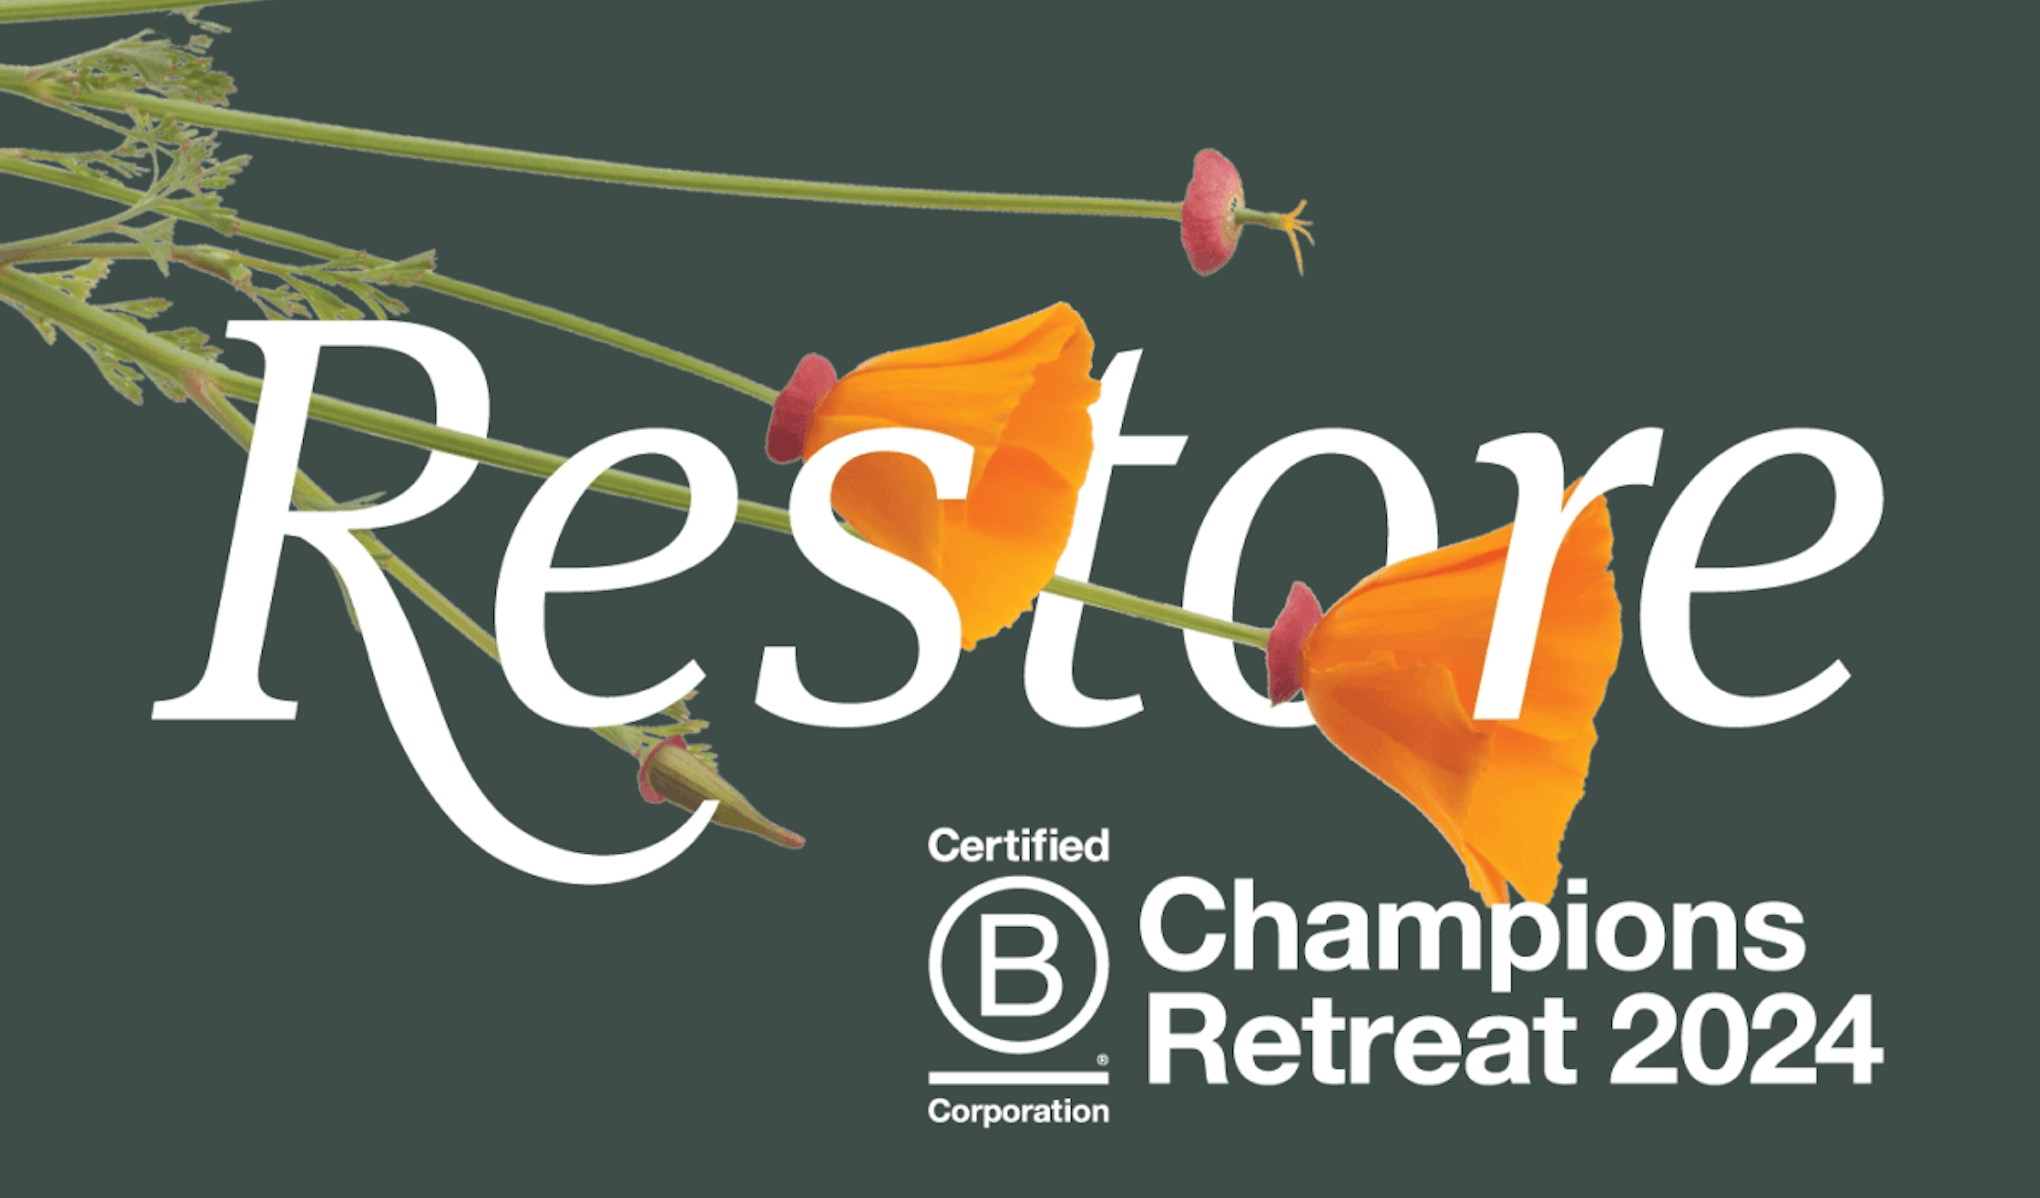 Green graphic with orange flowers that reads "Restore: Champions Retreat 2024" and includes the Certified B Corporation logo.